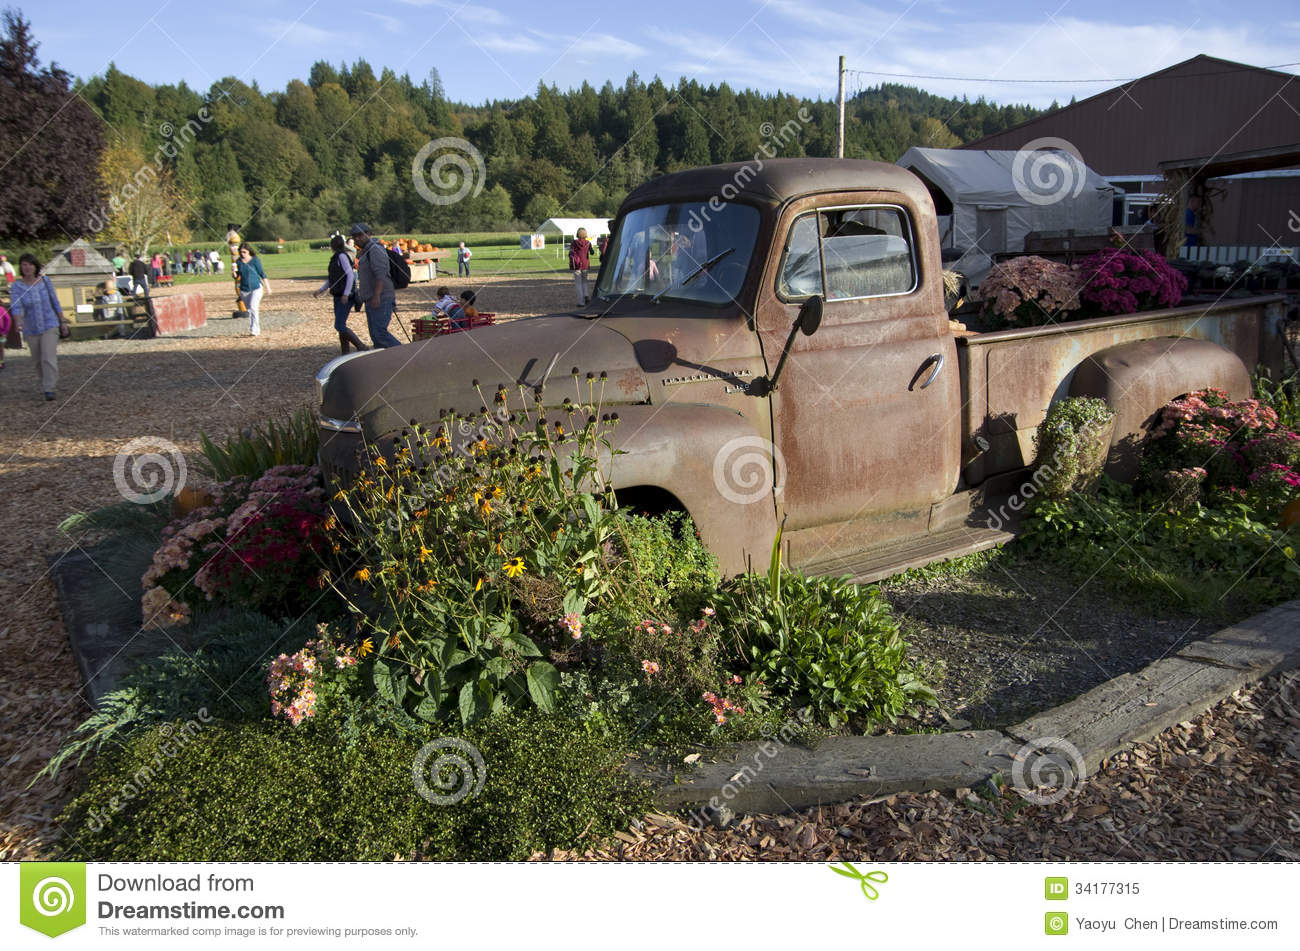 Rusty Old Truck Was Decorated With Flowers Was Placed At A Local Farm